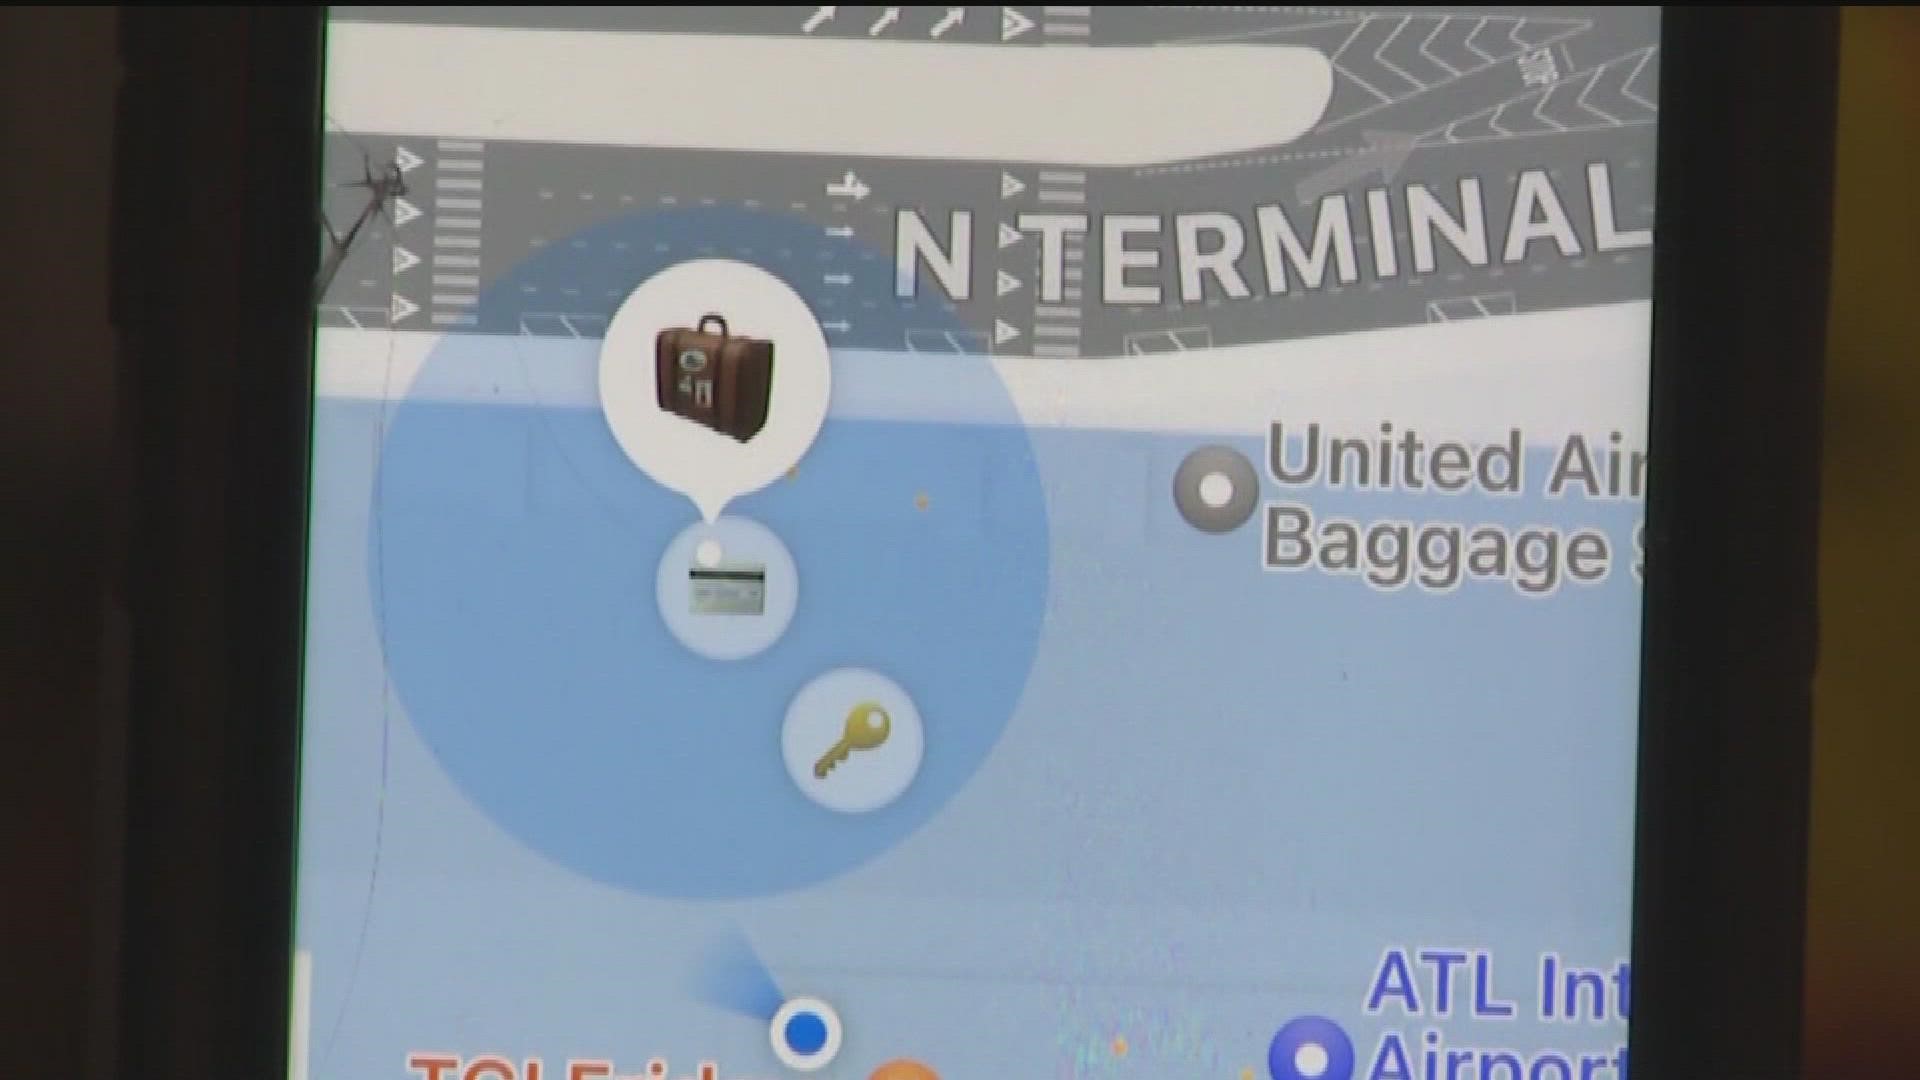 Bag thefts have been a recurring issue at Hartsfield-Jackson Atlanta International Airport, and police in recent months have stepped up efforts to deter it.